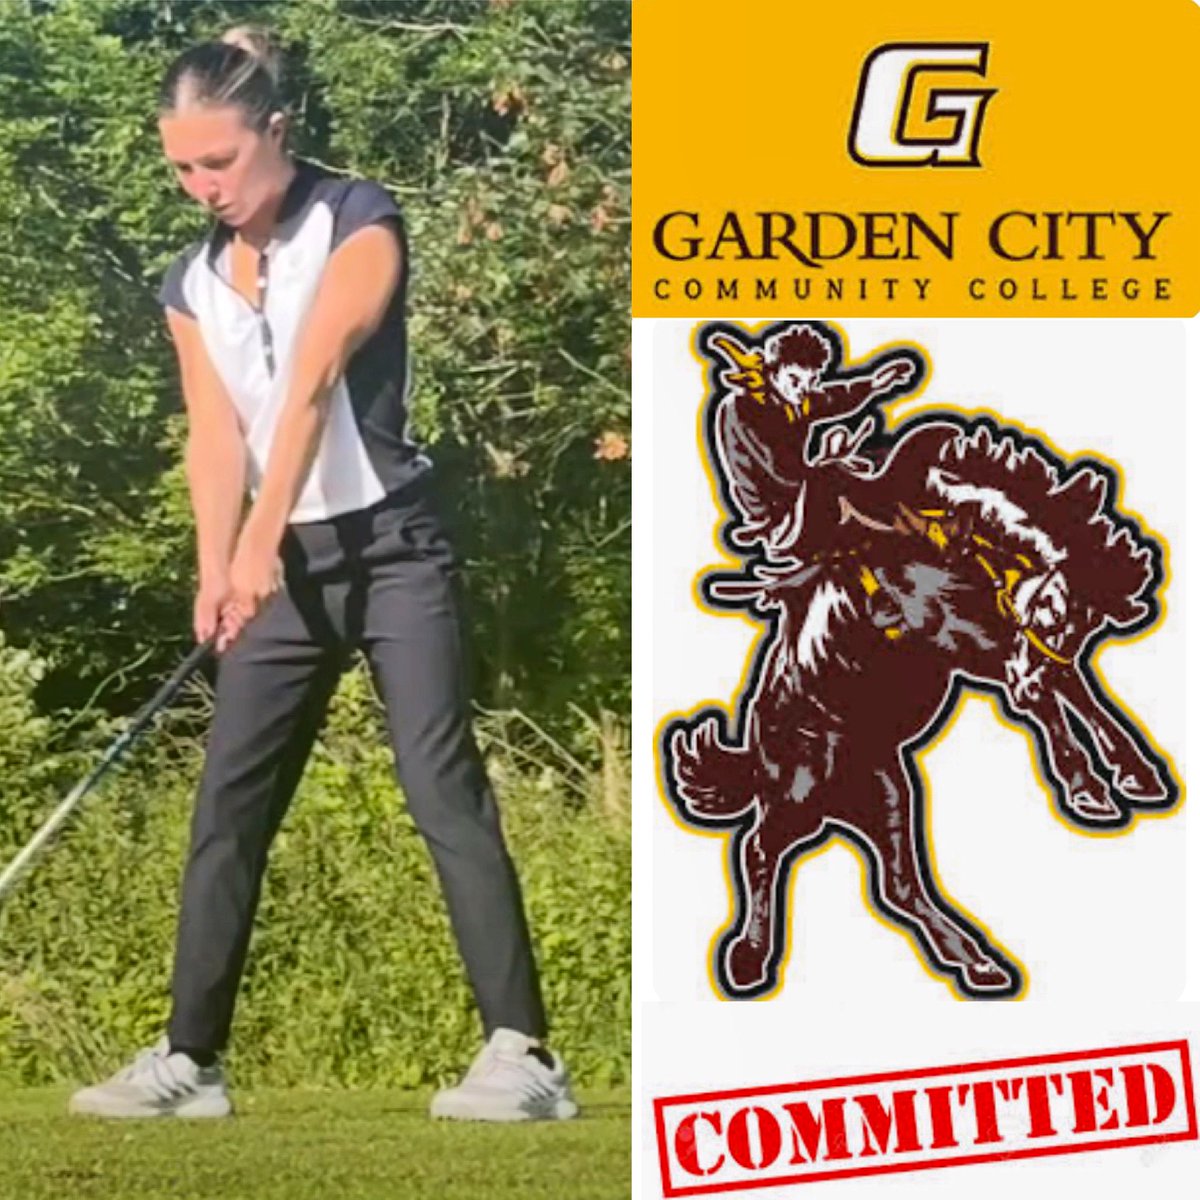 🚨COMMITTED🚨 We are delighted to announce Summer Griffiths from Lancashire, 🏴󠁧󠁢󠁥󠁮󠁧󠁿 has verbally committed to @GCCCBroncbuster . Summer will start at this NJCAA programme next Fall with @MillerCoachz & his team. We look forward to watching her progress in Garden City, Kansas.